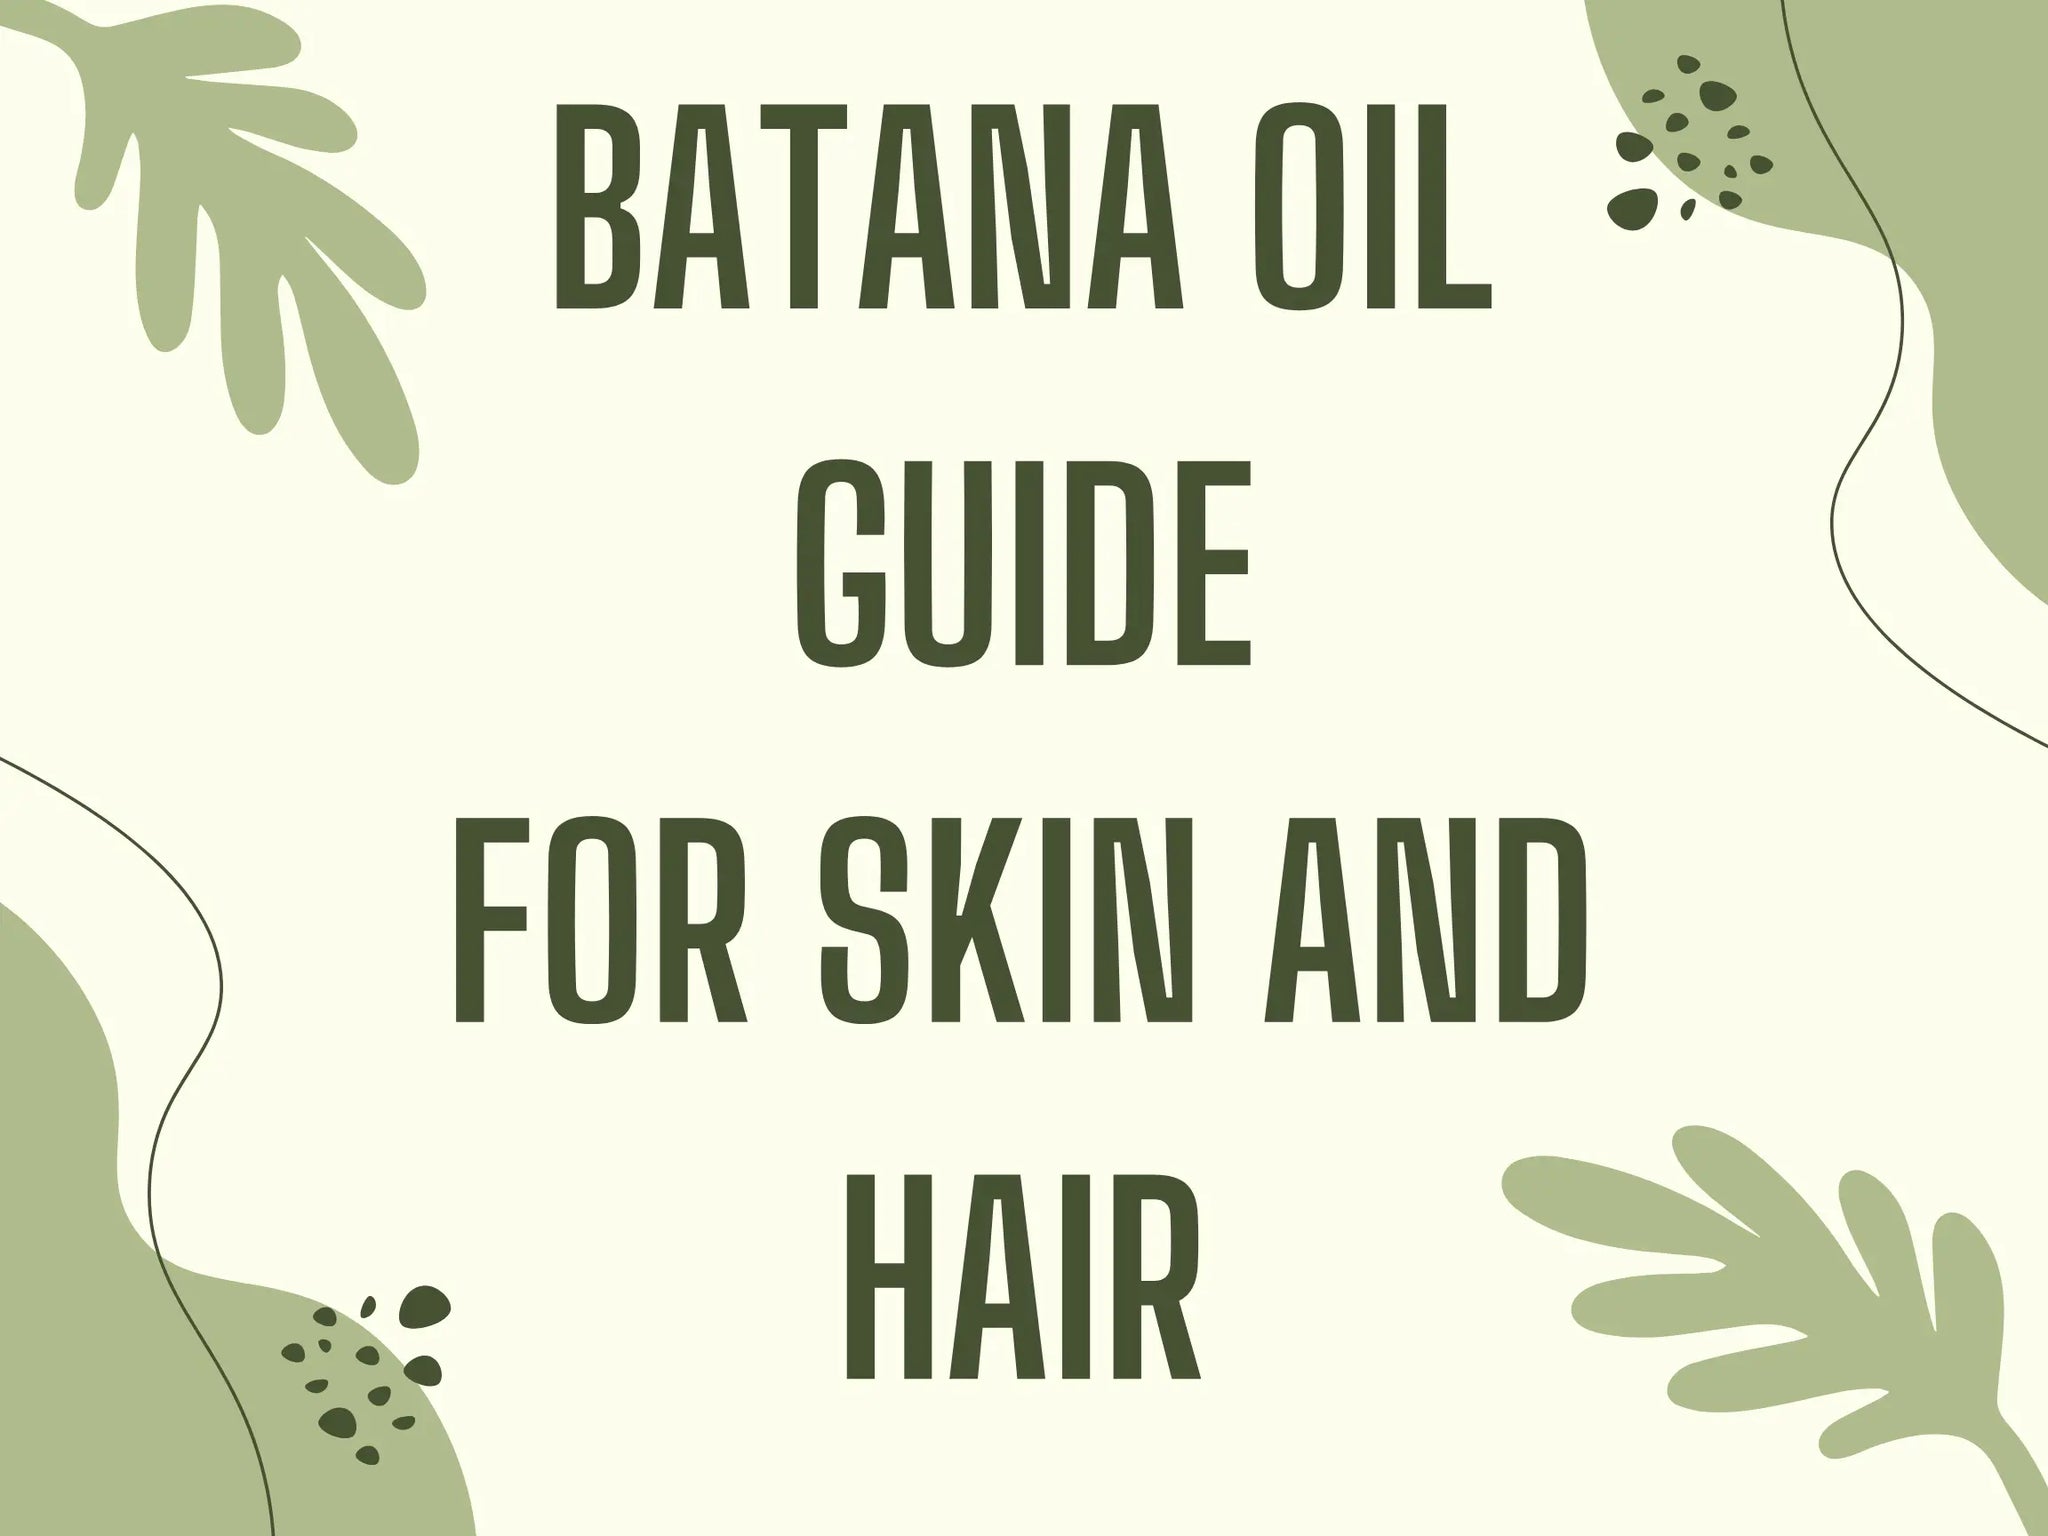 Batana Oil Benefits Guide For Skin and Hair